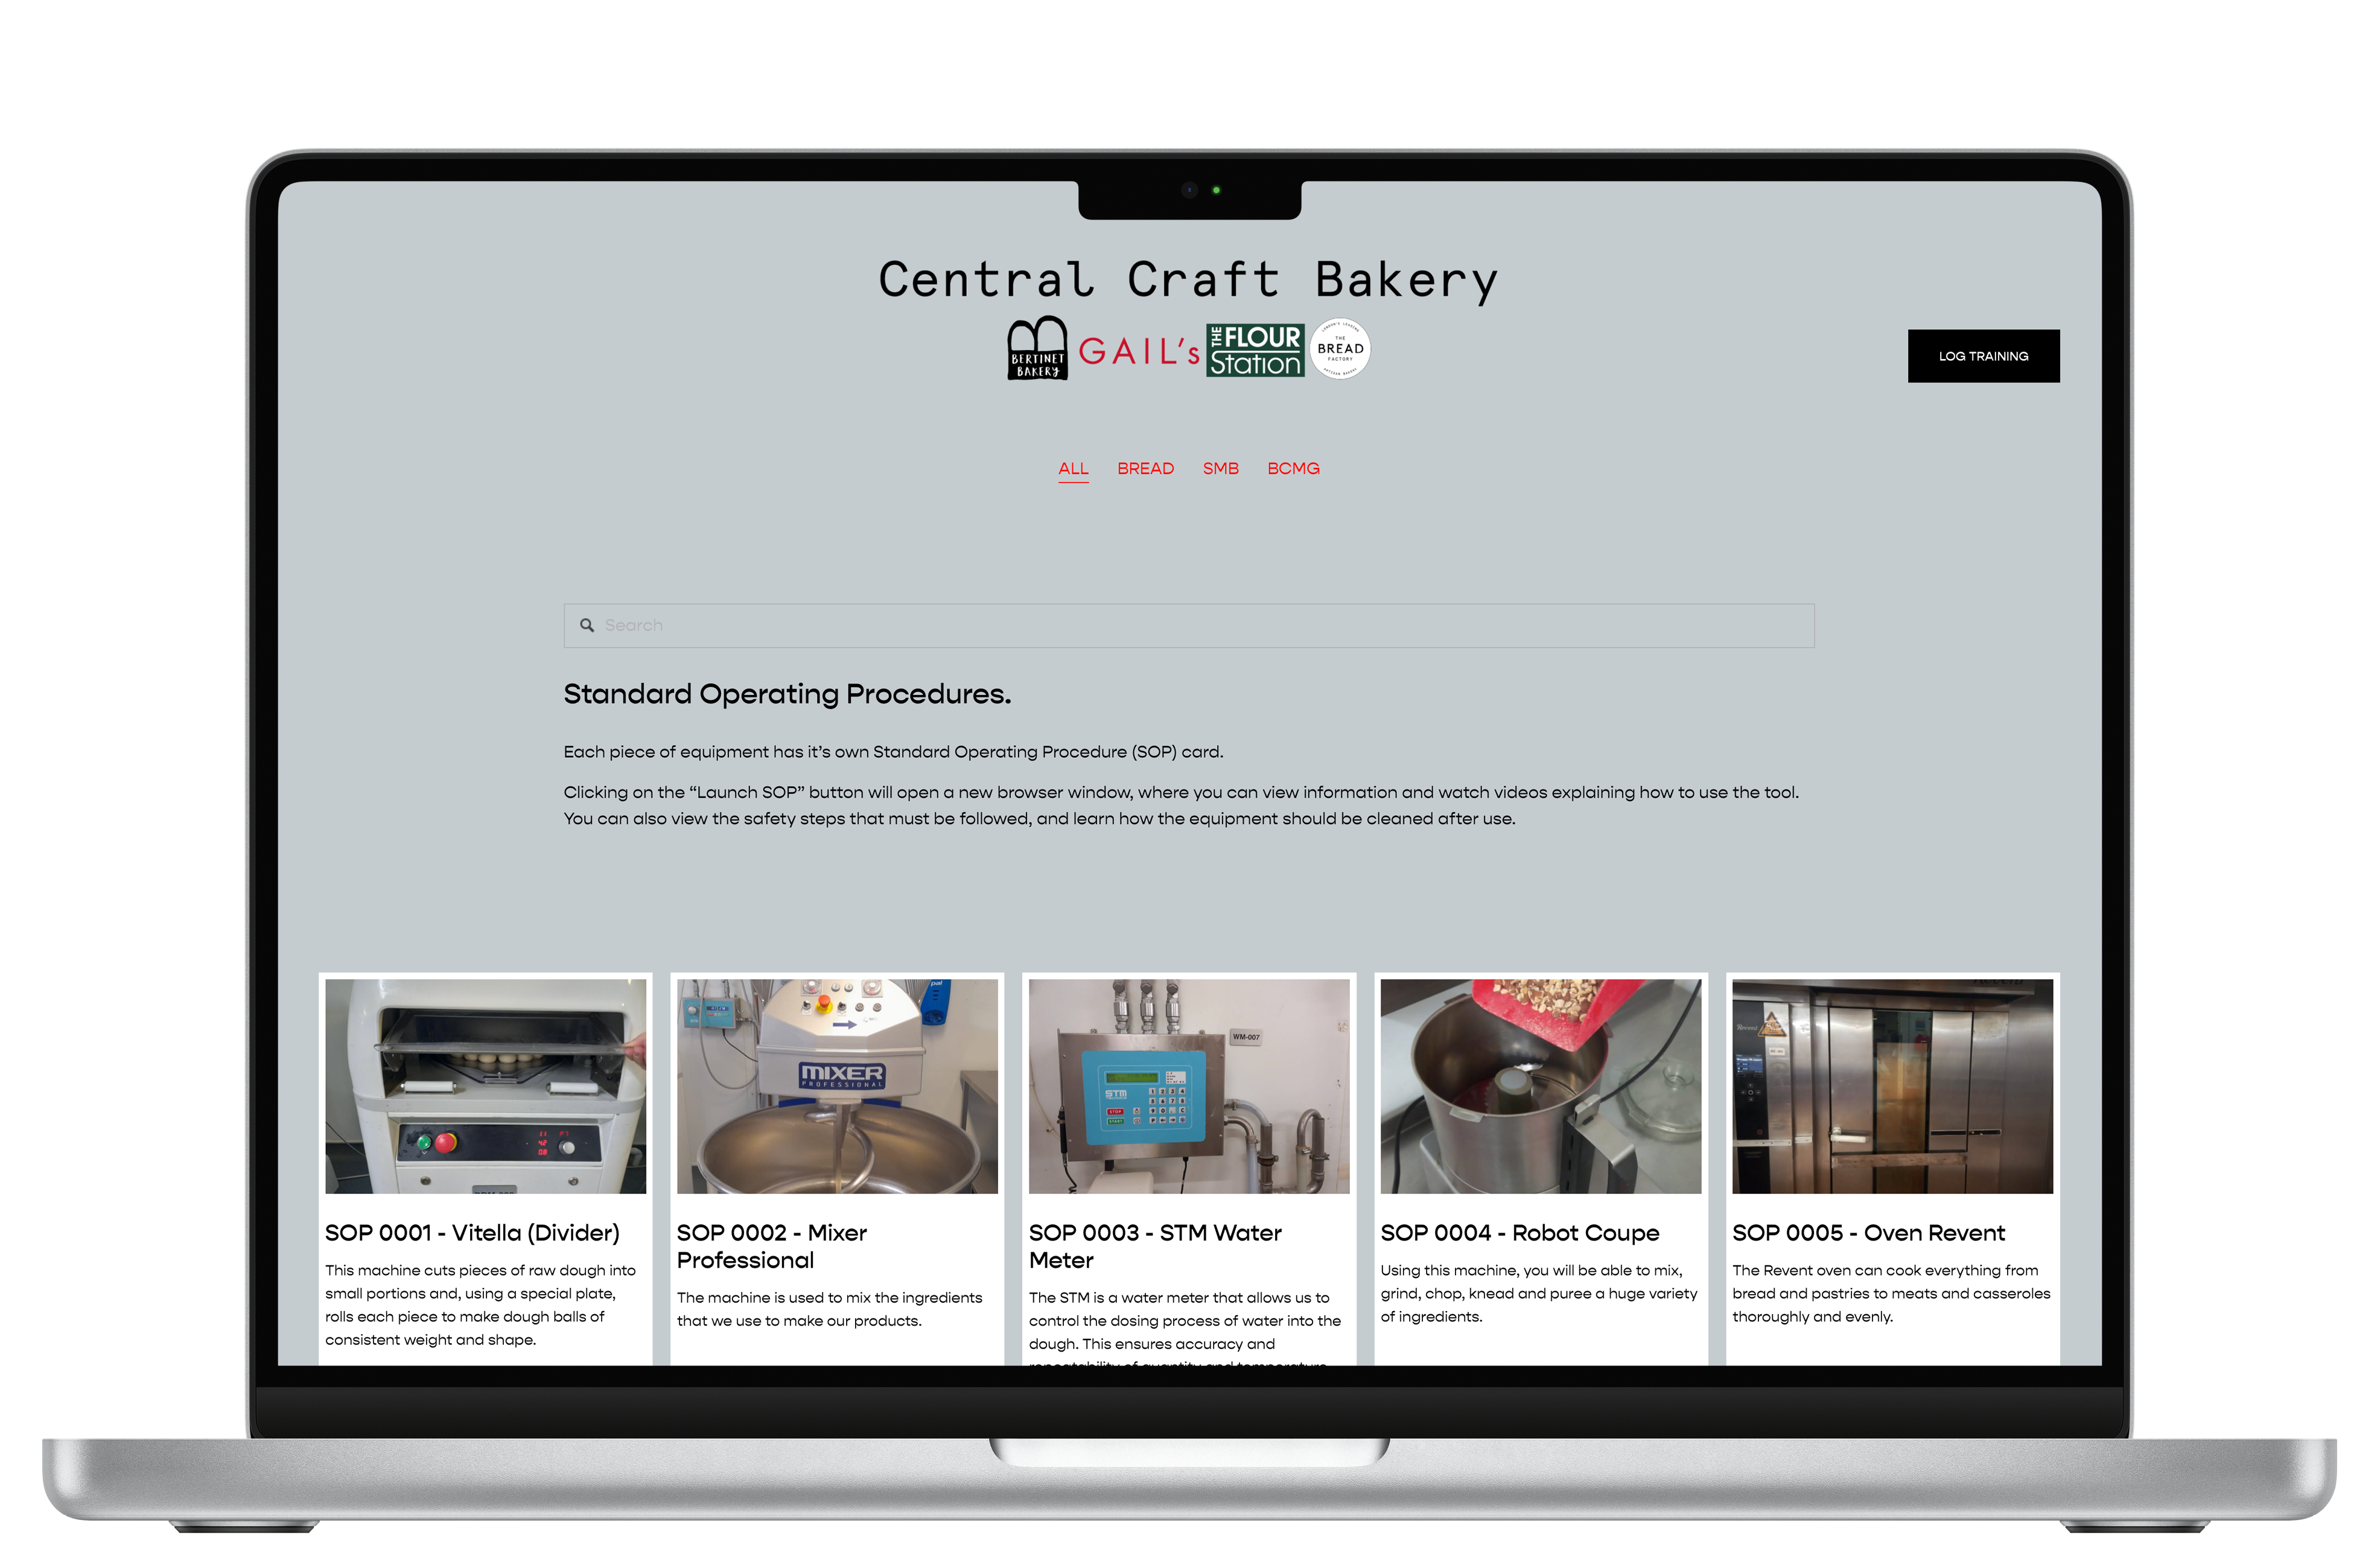 A laptop displaying the Central Craft Bakery website, showing their Standard Operating Procedures page.